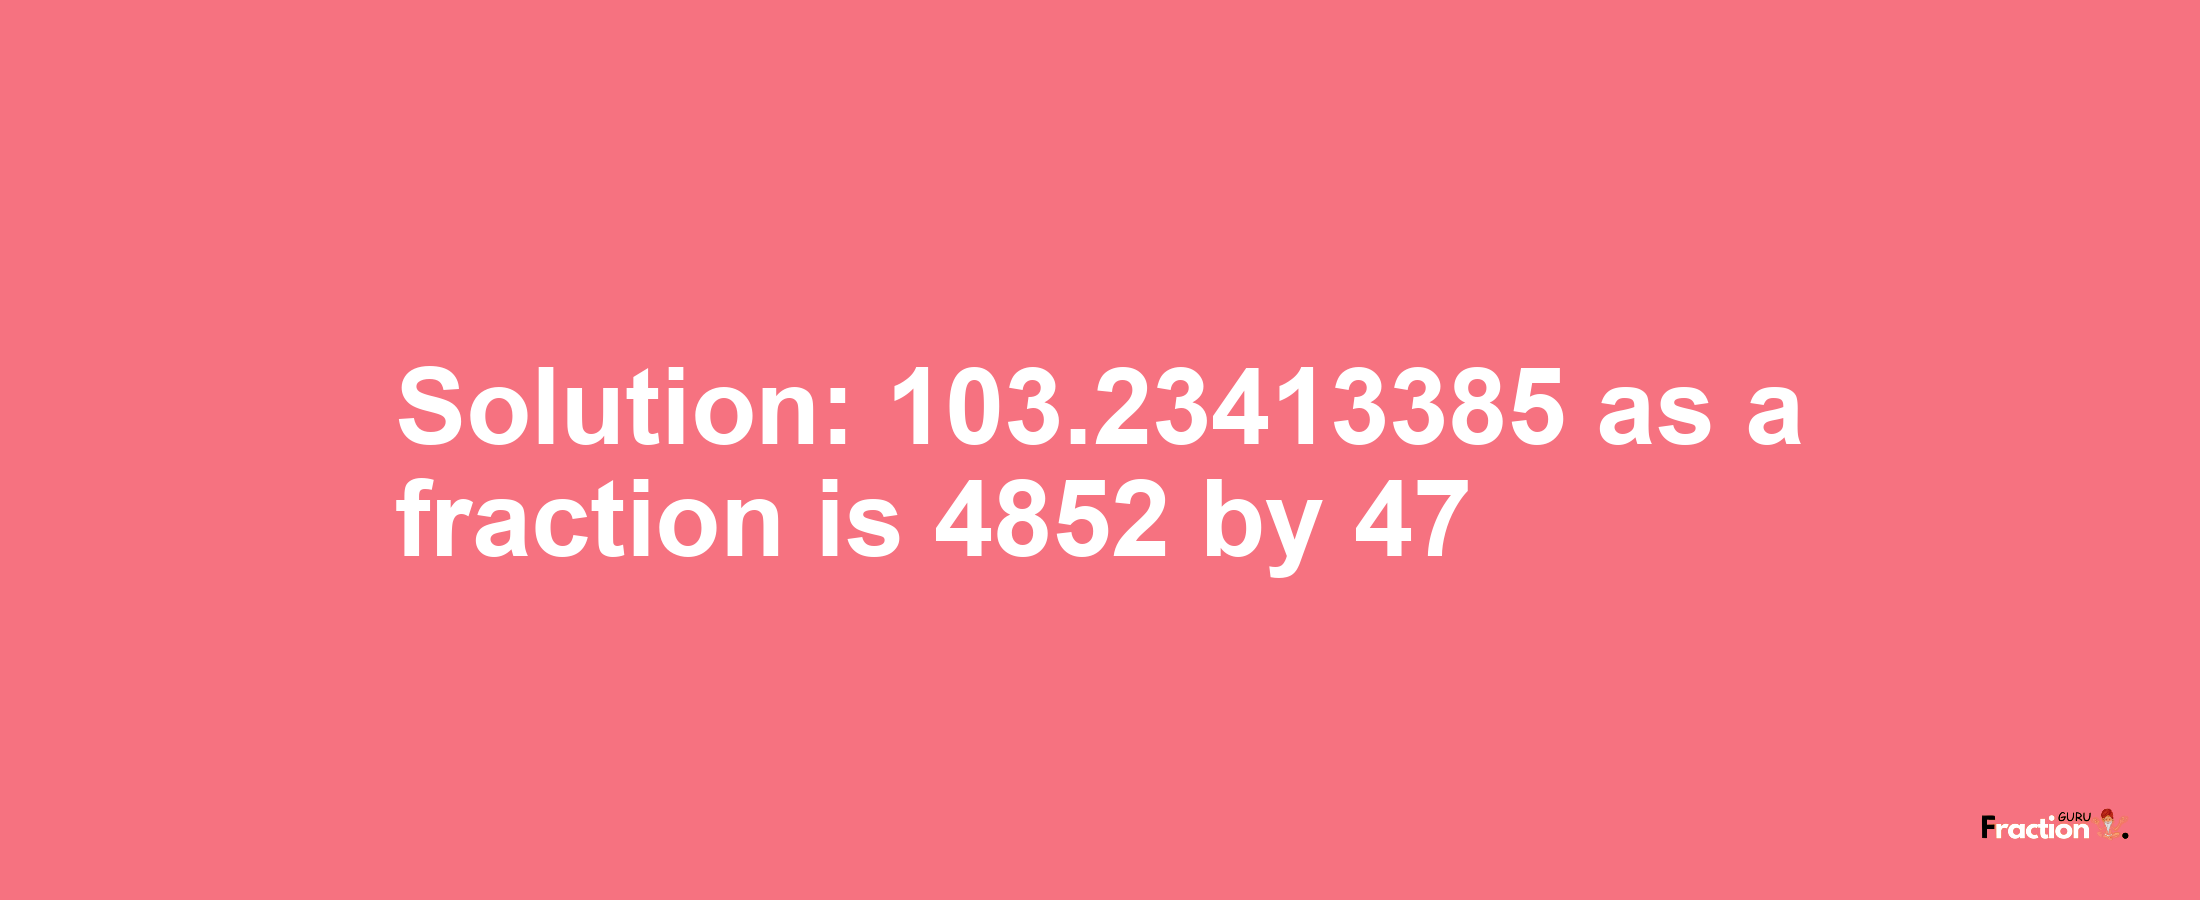 Solution:103.23413385 as a fraction is 4852/47